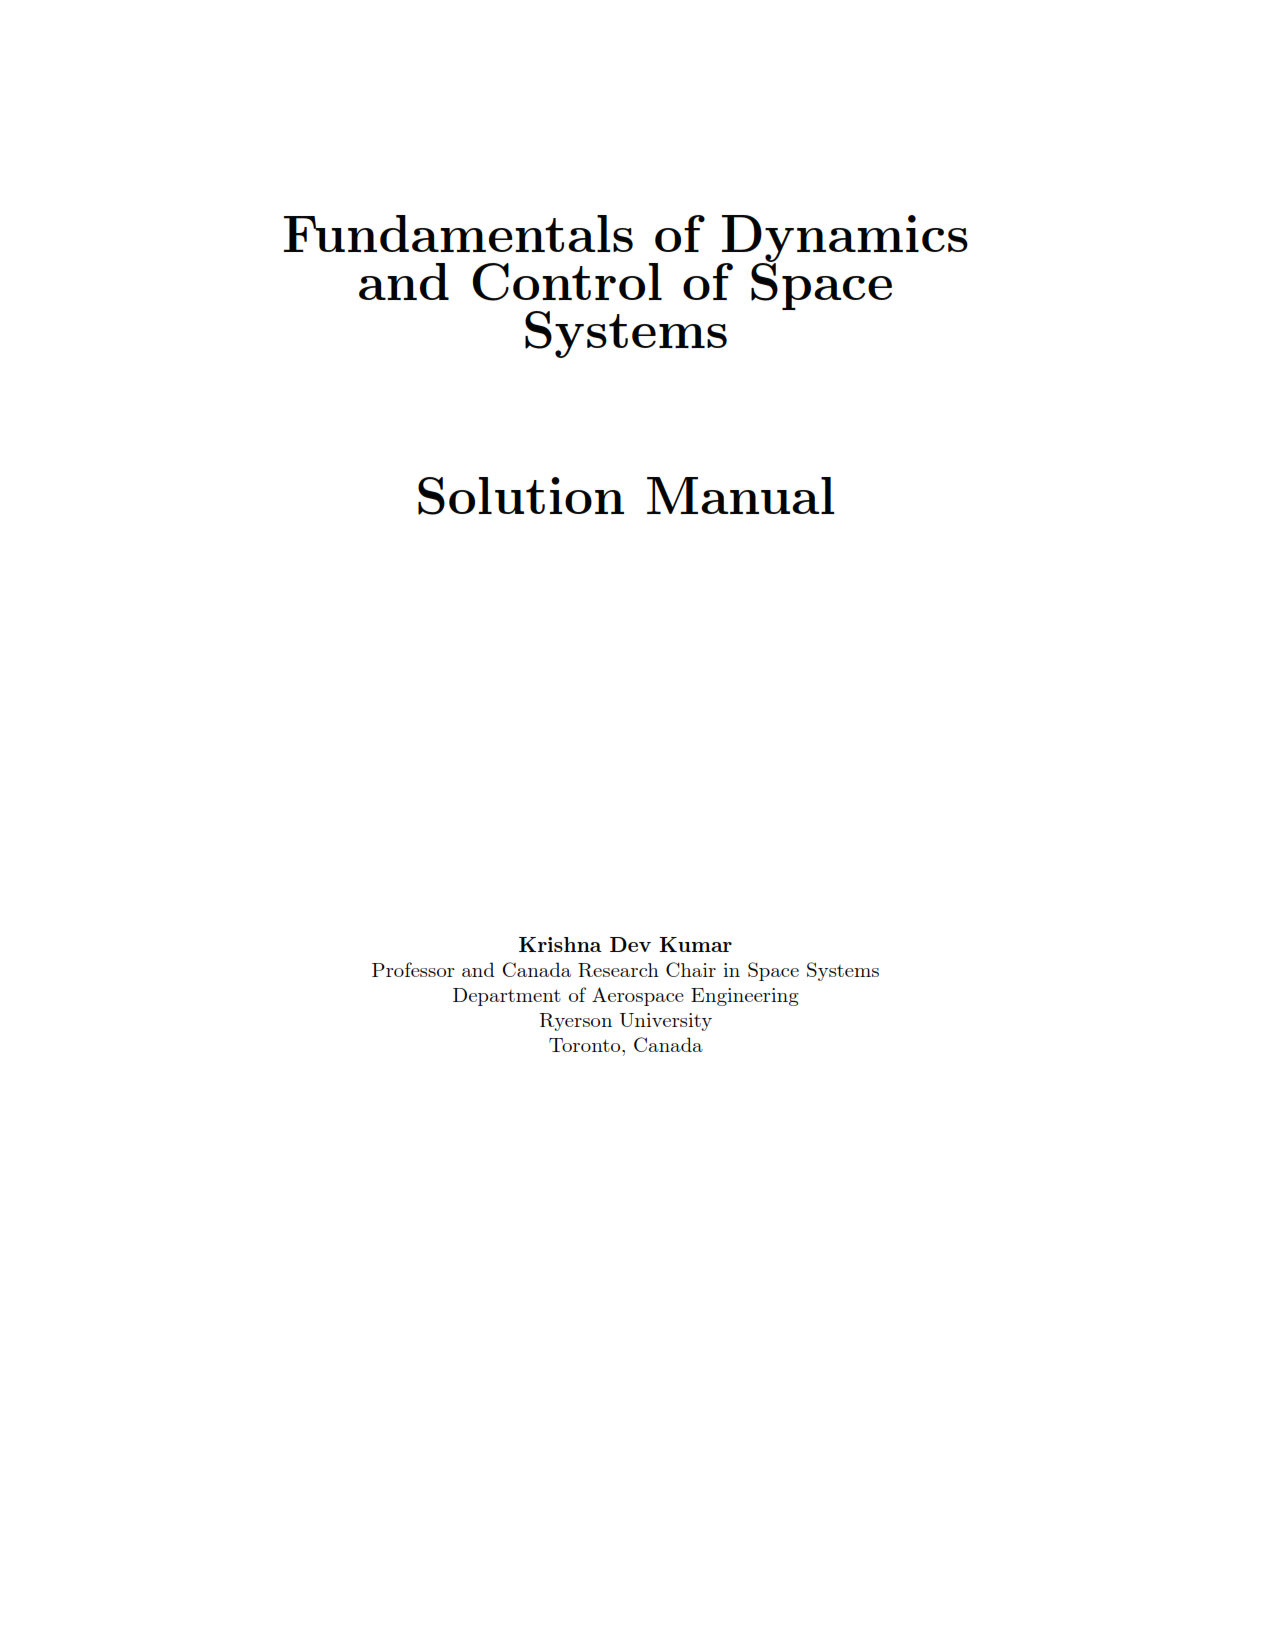 Download free Solution Manual Fundamentals of Dynamics and Control of Space Systems 1st edition by Krishna Dev Kumar eBook pdf